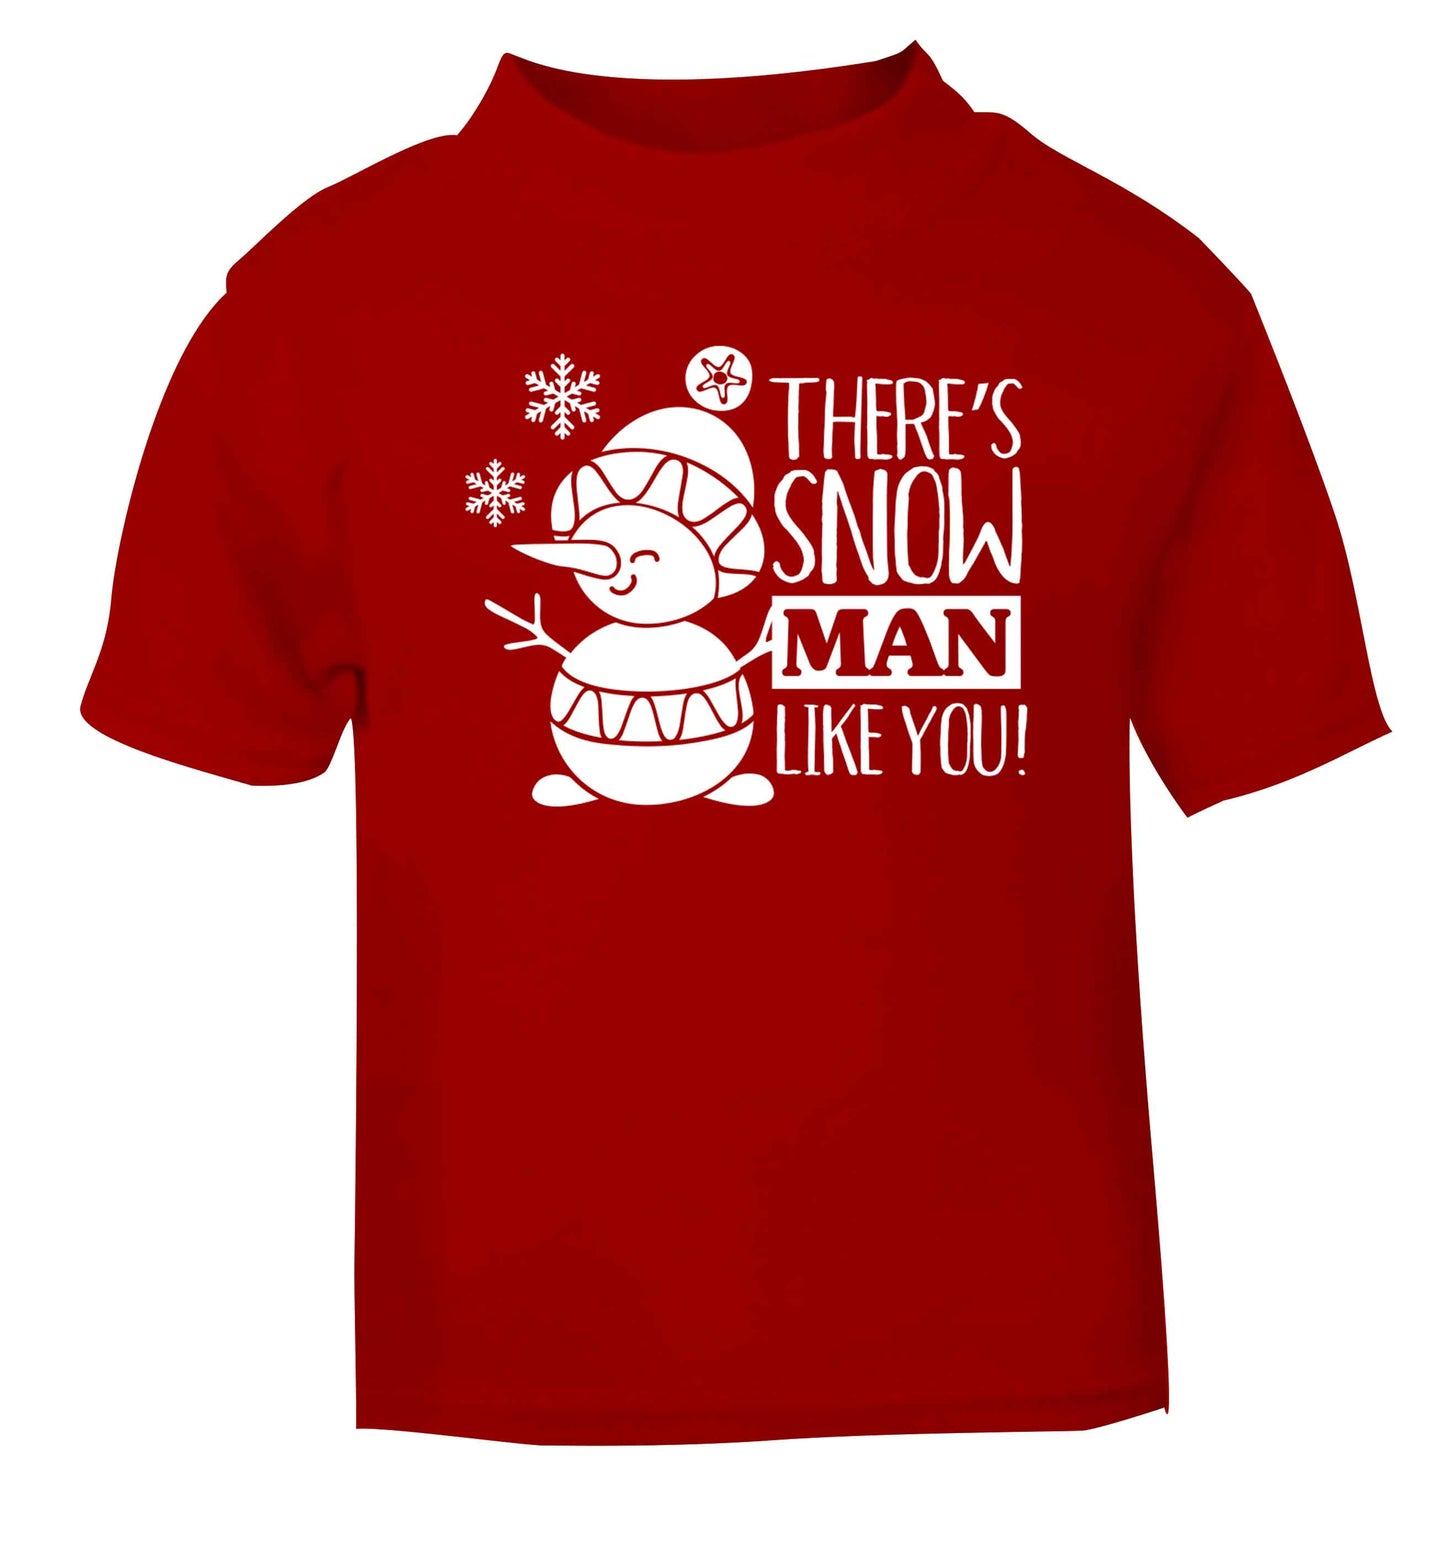 There's snow man like you red baby toddler Tshirt 2 Years